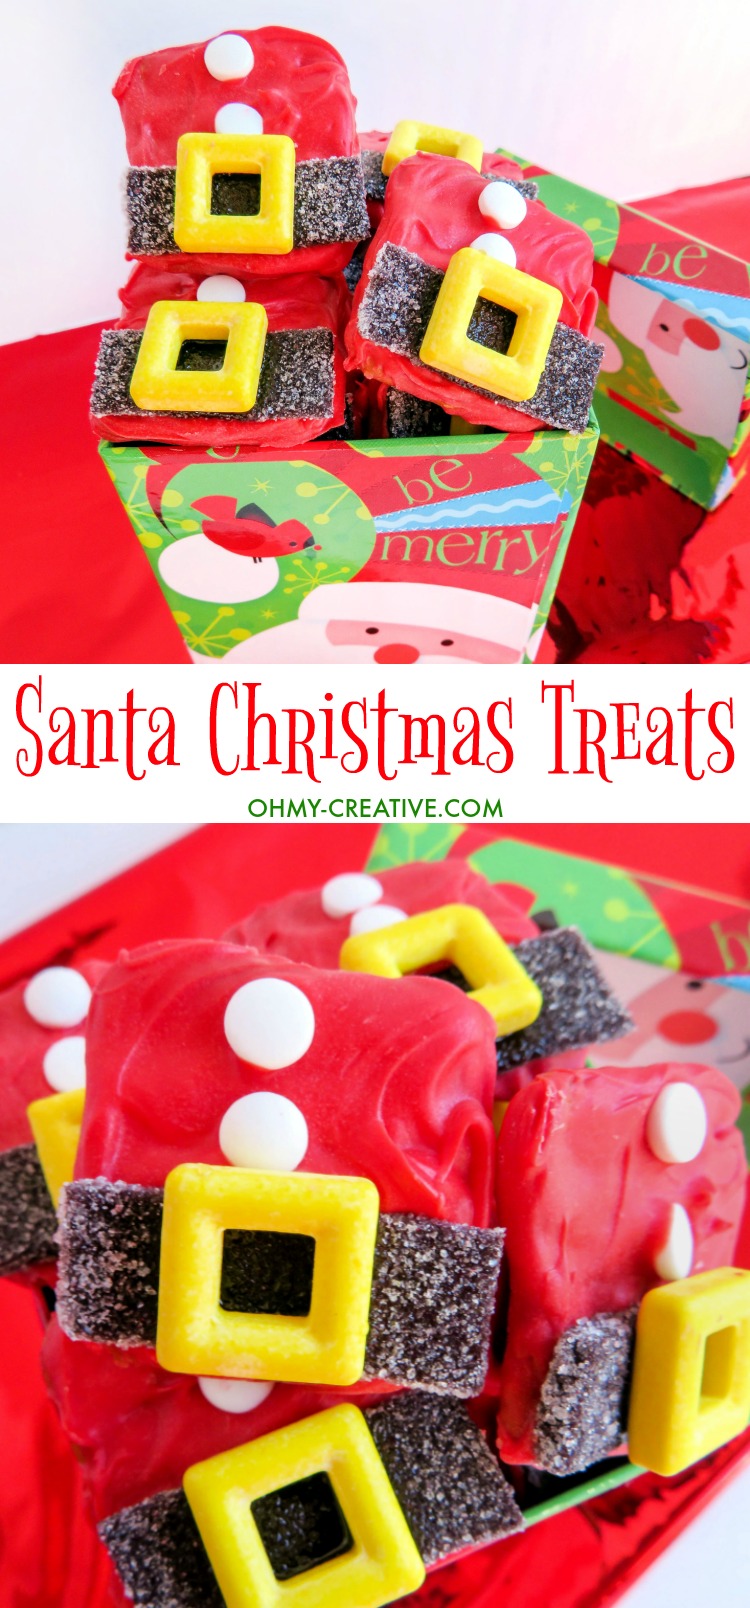 These Santa Suit Christmas Treats are perfect for holiday parties - tasty chocolate pretzel bites! | OHMY-CREATIVE.COM